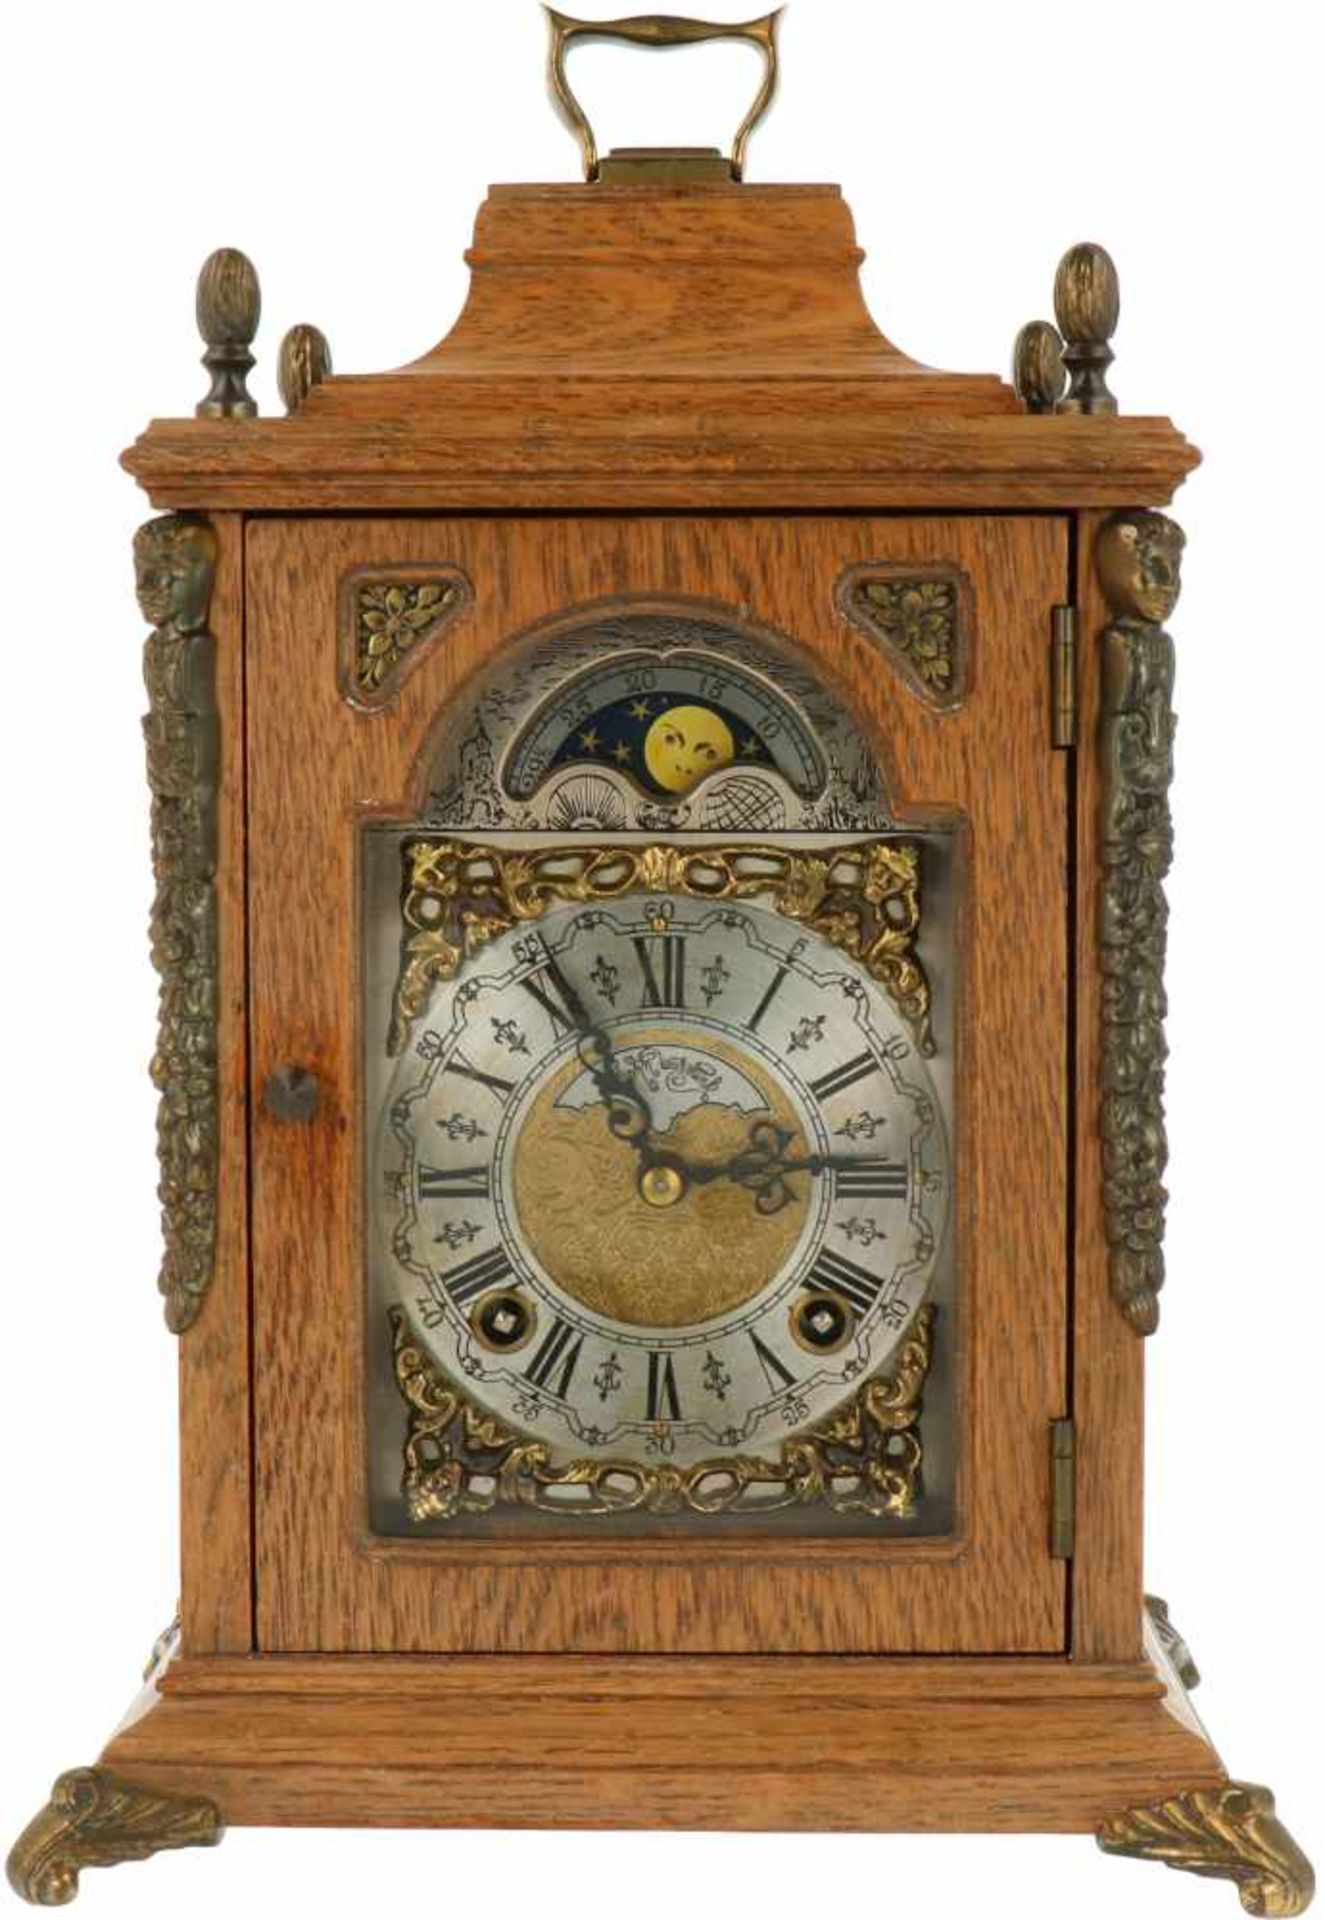 A wood table clock with bronze ornaments. Warmink, mid 20th century.